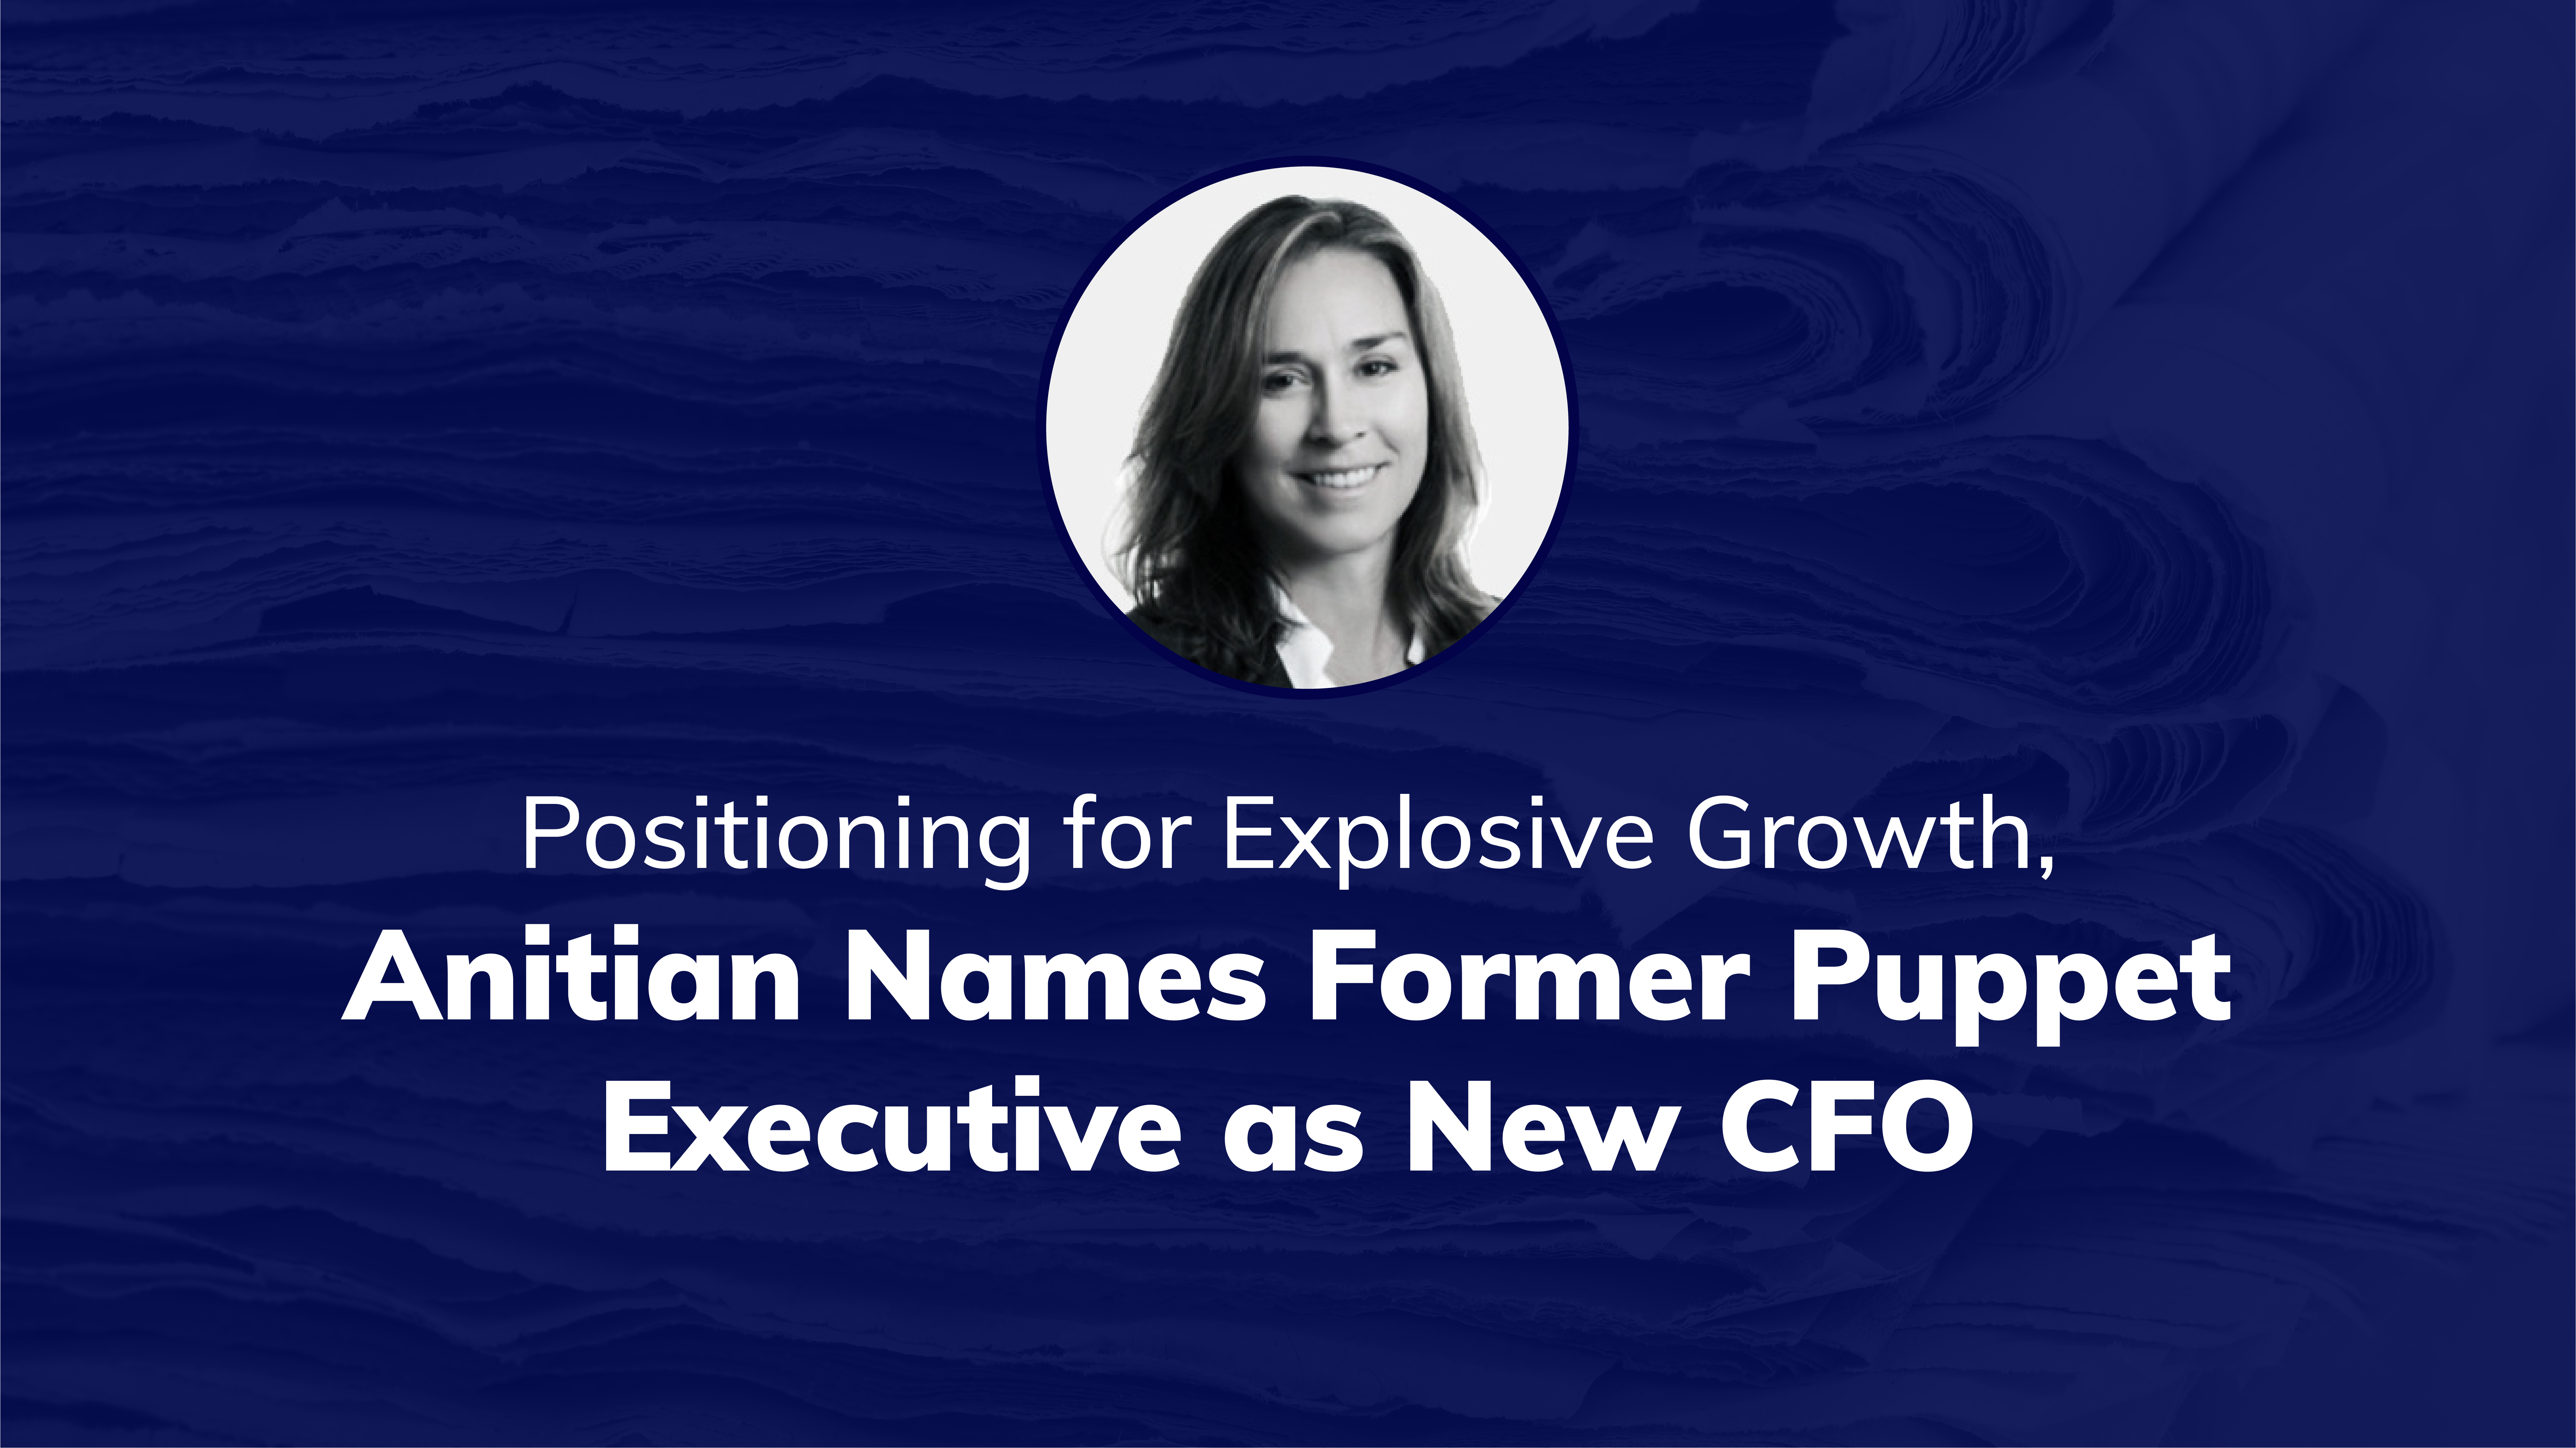 Press Release - Positioning for Explosive Growth, Anitian Names Former Puppet Executive as New CFO